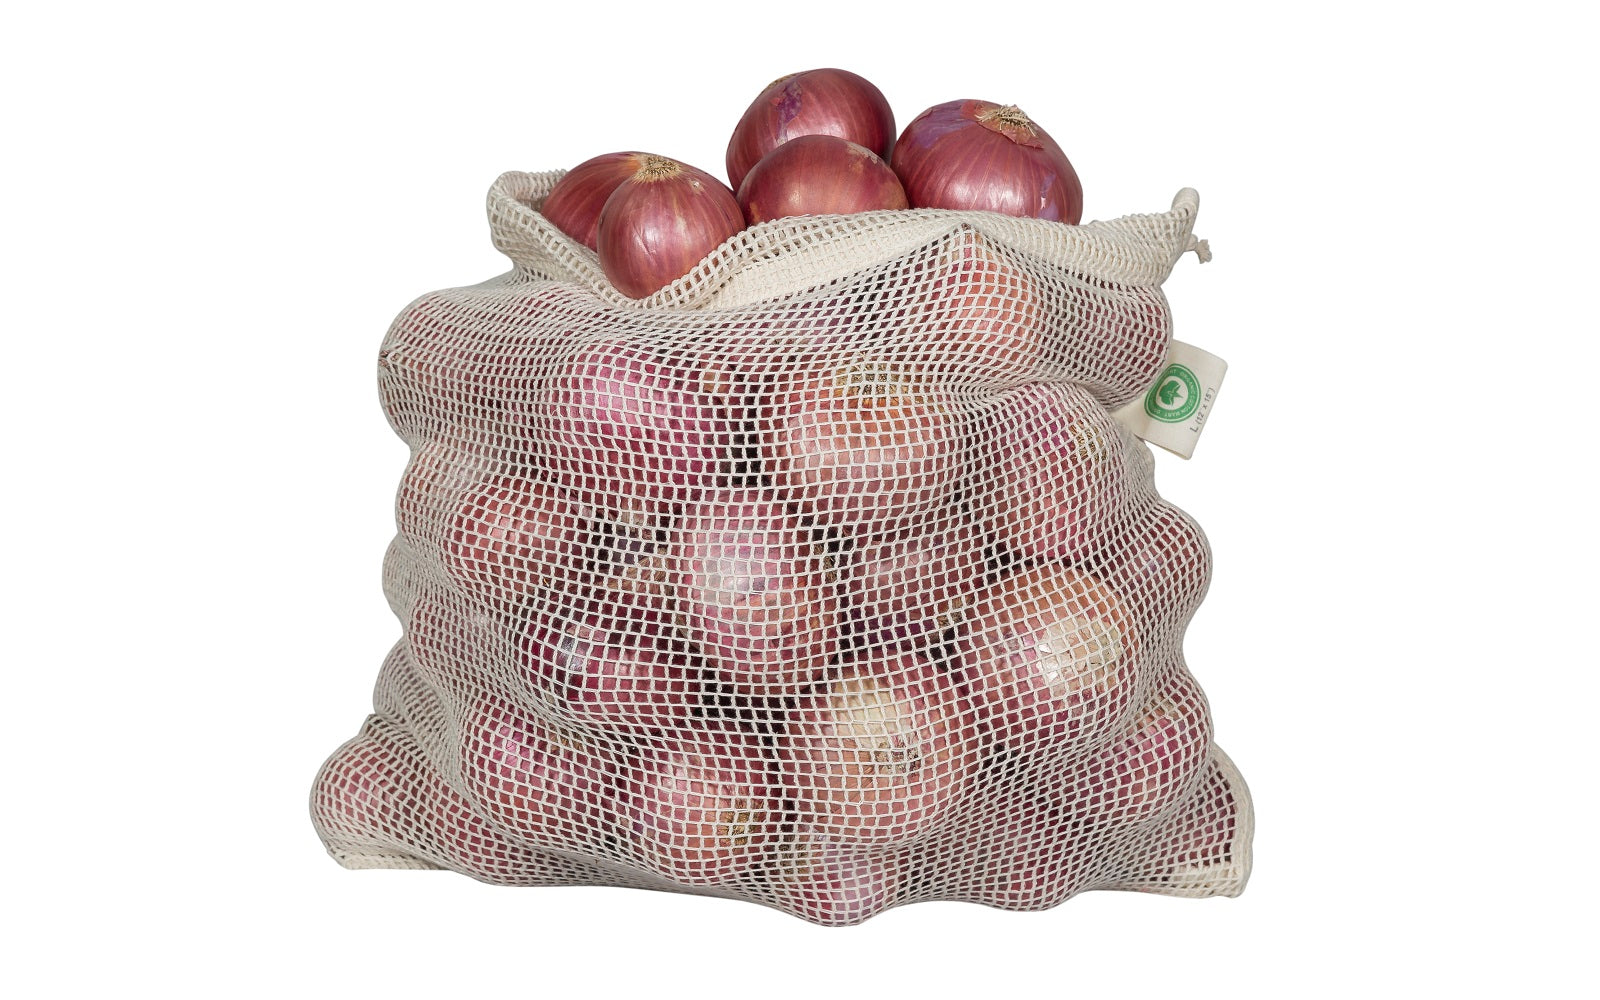 Cotton Mesh Produce Bags  Reusable Net Bags for Produce and